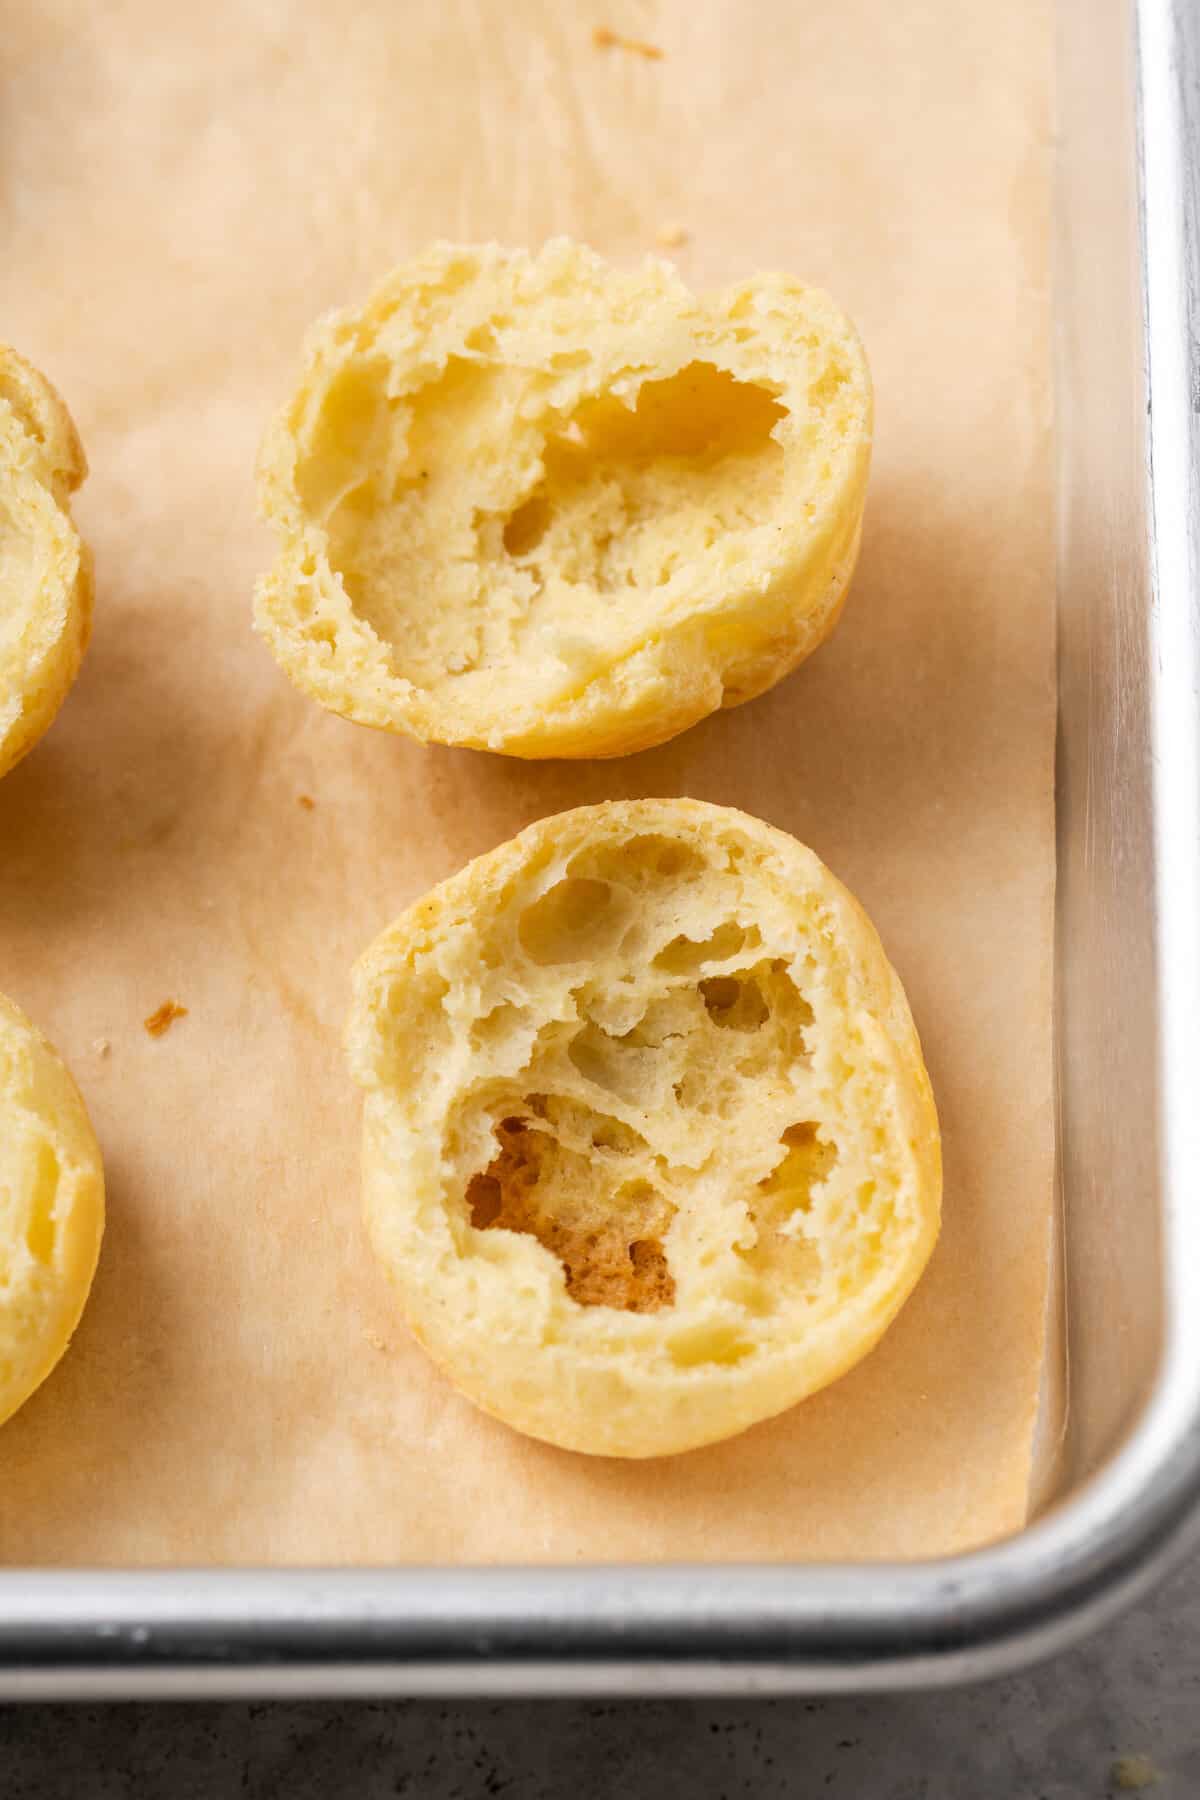 Two halves of a gluten-free cream puff on a parchment-lined baking sheet.